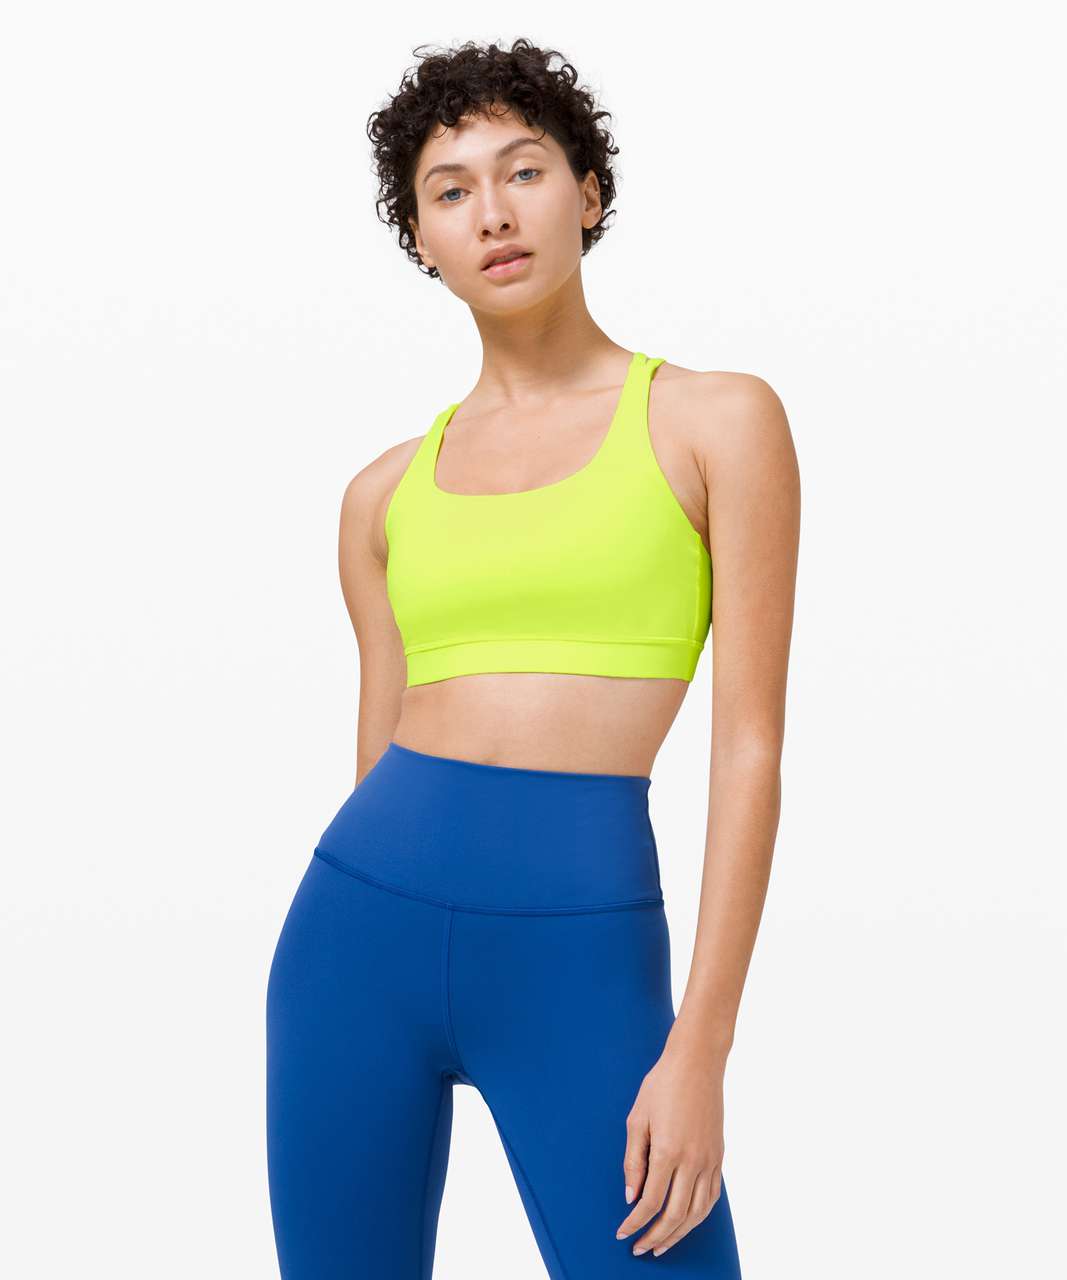 LL Yellow Yoga Outfit High Impact Seamless Sport Bra For Women Gym Active  Wear, Yoga Workout Vest, Sports Tops In Same Style As LULU Lemon From  Hadis, $18.99